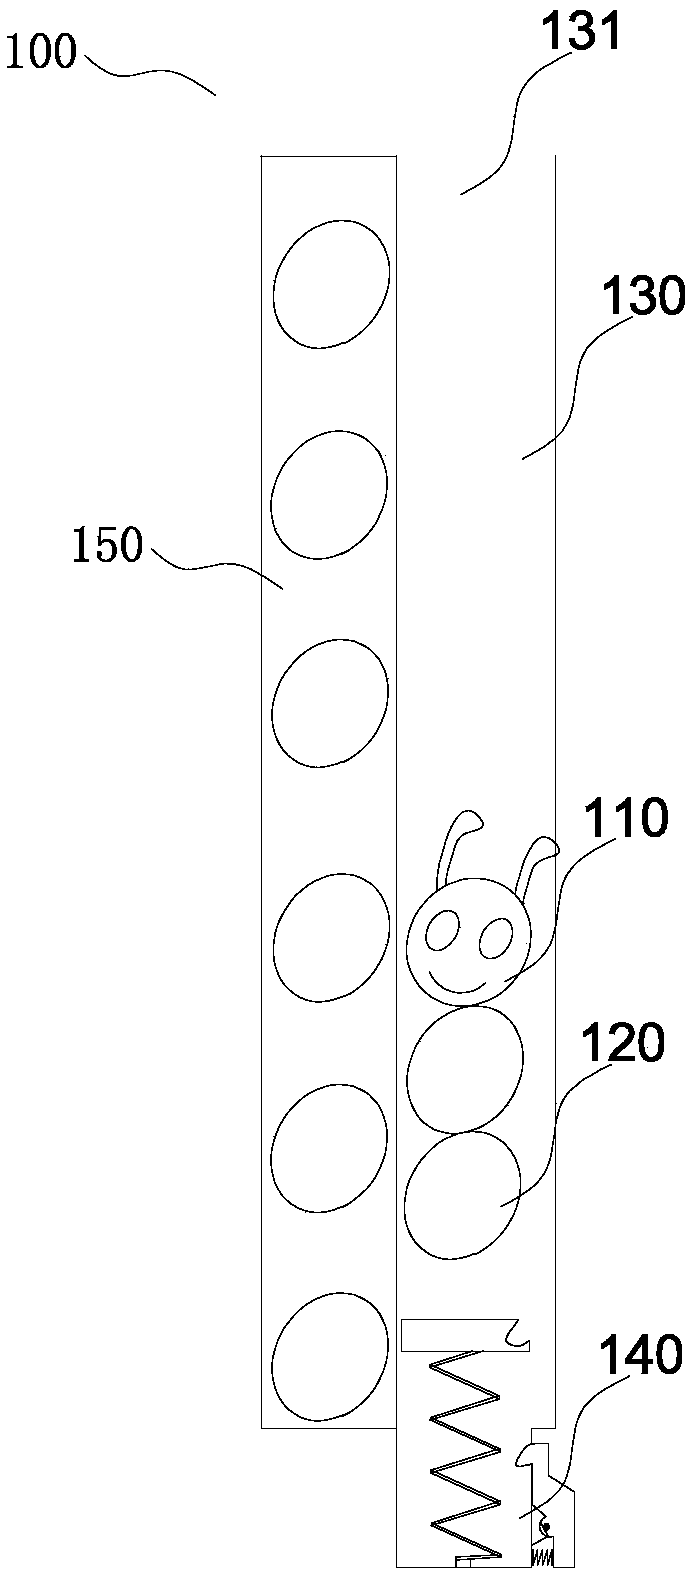 Intelligent modularized combining equipment and system